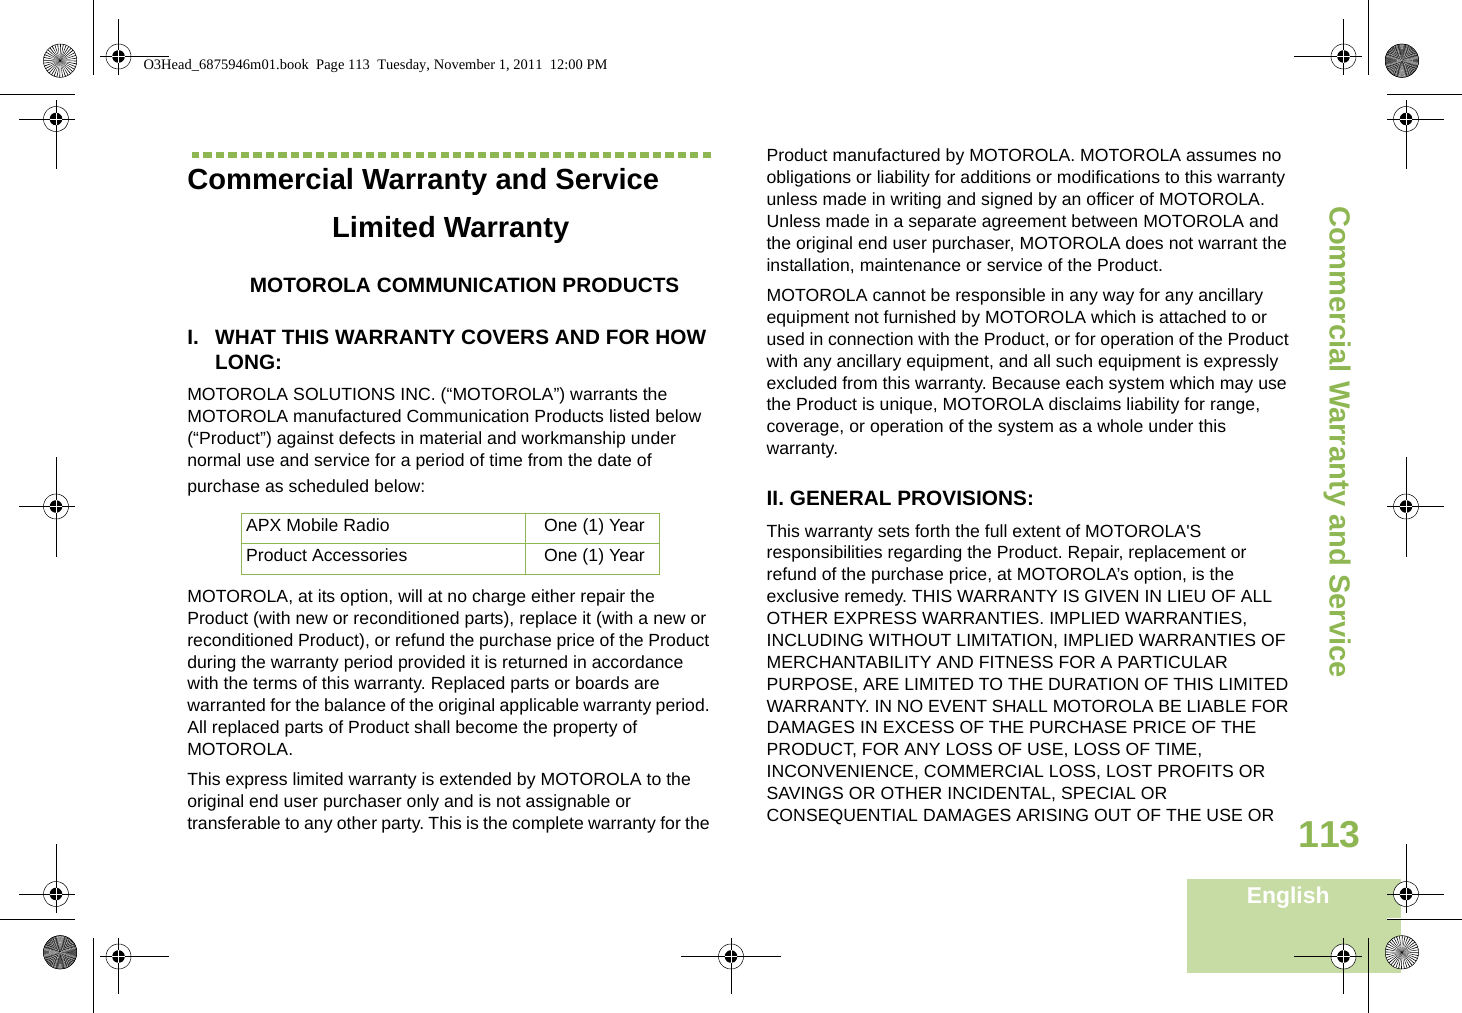 Commercial Warranty and ServiceEnglish113Commercial Warranty and ServiceLimited WarrantyMOTOROLA COMMUNICATION PRODUCTSI. WHAT THIS WARRANTY COVERS AND FOR HOW LONG:MOTOROLA SOLUTIONS INC. (“MOTOROLA”) warrants the MOTOROLA manufactured Communication Products listed below (“Product”) against defects in material and workmanship under normal use and service for a period of time from the date of purchase as scheduled below:MOTOROLA, at its option, will at no charge either repair the Product (with new or reconditioned parts), replace it (with a new or reconditioned Product), or refund the purchase price of the Product during the warranty period provided it is returned in accordance with the terms of this warranty. Replaced parts or boards are warranted for the balance of the original applicable warranty period. All replaced parts of Product shall become the property of MOTOROLA.This express limited warranty is extended by MOTOROLA to the original end user purchaser only and is not assignable or transferable to any other party. This is the complete warranty for the Product manufactured by MOTOROLA. MOTOROLA assumes no obligations or liability for additions or modifications to this warranty unless made in writing and signed by an officer of MOTOROLA. Unless made in a separate agreement between MOTOROLA and the original end user purchaser, MOTOROLA does not warrant the installation, maintenance or service of the Product.MOTOROLA cannot be responsible in any way for any ancillary equipment not furnished by MOTOROLA which is attached to or used in connection with the Product, or for operation of the Product with any ancillary equipment, and all such equipment is expressly excluded from this warranty. Because each system which may use the Product is unique, MOTOROLA disclaims liability for range, coverage, or operation of the system as a whole under this warranty.II. GENERAL PROVISIONS:This warranty sets forth the full extent of MOTOROLA&apos;S responsibilities regarding the Product. Repair, replacement or refund of the purchase price, at MOTOROLA’s option, is the exclusive remedy. THIS WARRANTY IS GIVEN IN LIEU OF ALL OTHER EXPRESS WARRANTIES. IMPLIED WARRANTIES, INCLUDING WITHOUT LIMITATION, IMPLIED WARRANTIES OF MERCHANTABILITY AND FITNESS FOR A PARTICULAR PURPOSE, ARE LIMITED TO THE DURATION OF THIS LIMITED WARRANTY. IN NO EVENT SHALL MOTOROLA BE LIABLE FOR DAMAGES IN EXCESS OF THE PURCHASE PRICE OF THE PRODUCT, FOR ANY LOSS OF USE, LOSS OF TIME, INCONVENIENCE, COMMERCIAL LOSS, LOST PROFITS OR SAVINGS OR OTHER INCIDENTAL, SPECIAL OR CONSEQUENTIAL DAMAGES ARISING OUT OF THE USE OR APX Mobile Radio  One (1) YearProduct Accessories One (1) YearO3Head_6875946m01.book  Page 113  Tuesday, November 1, 2011  12:00 PM